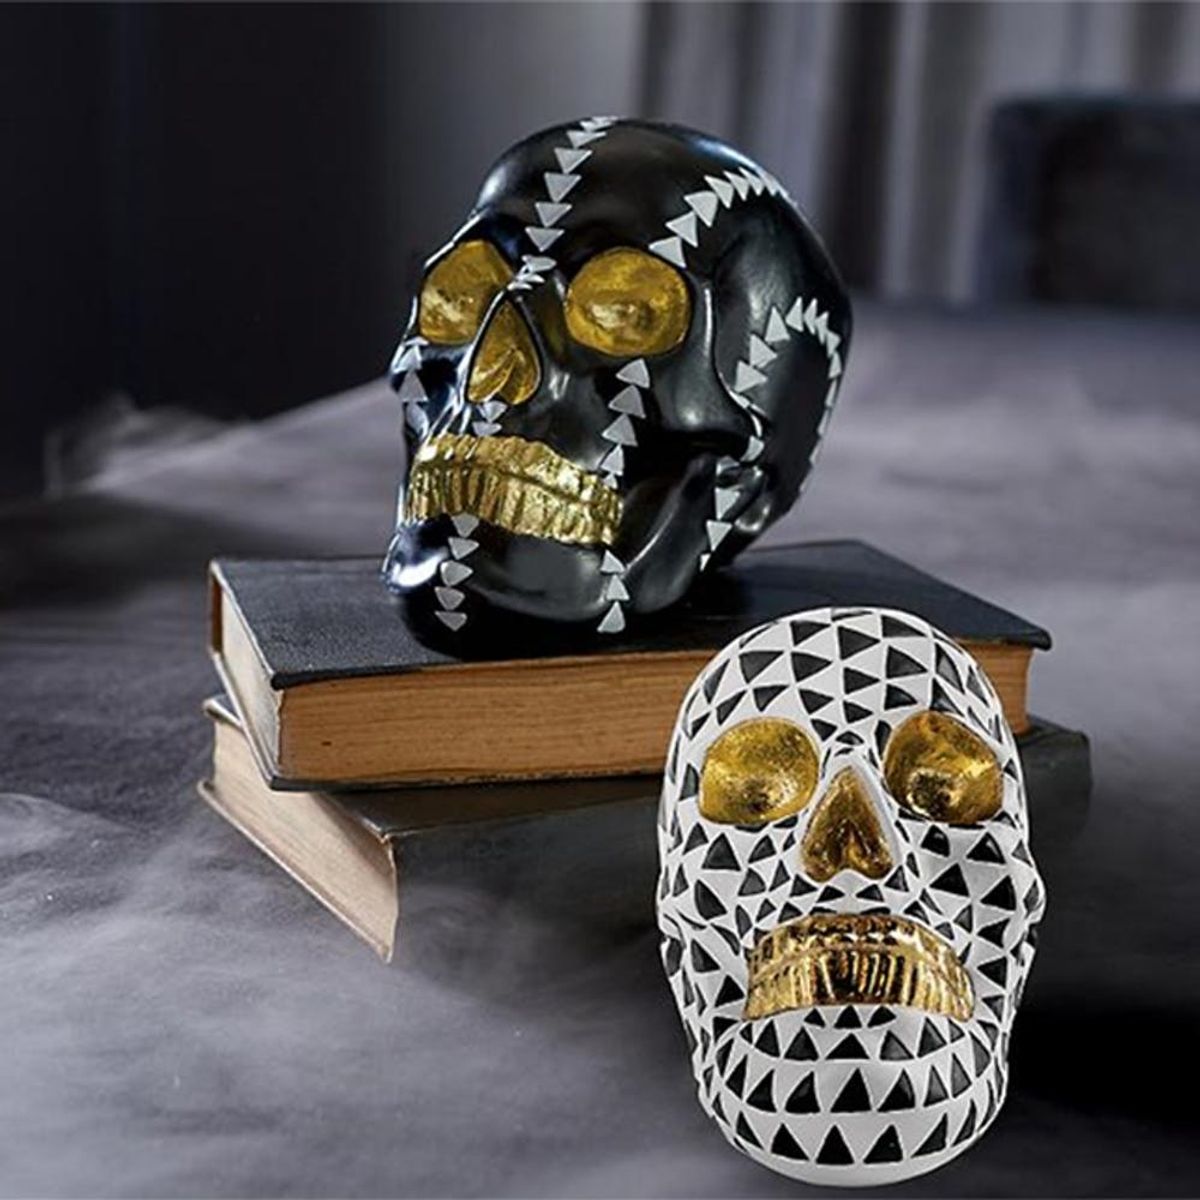 The Stylish Halloween Decor Trend You’ll Want to Leave Up All Year